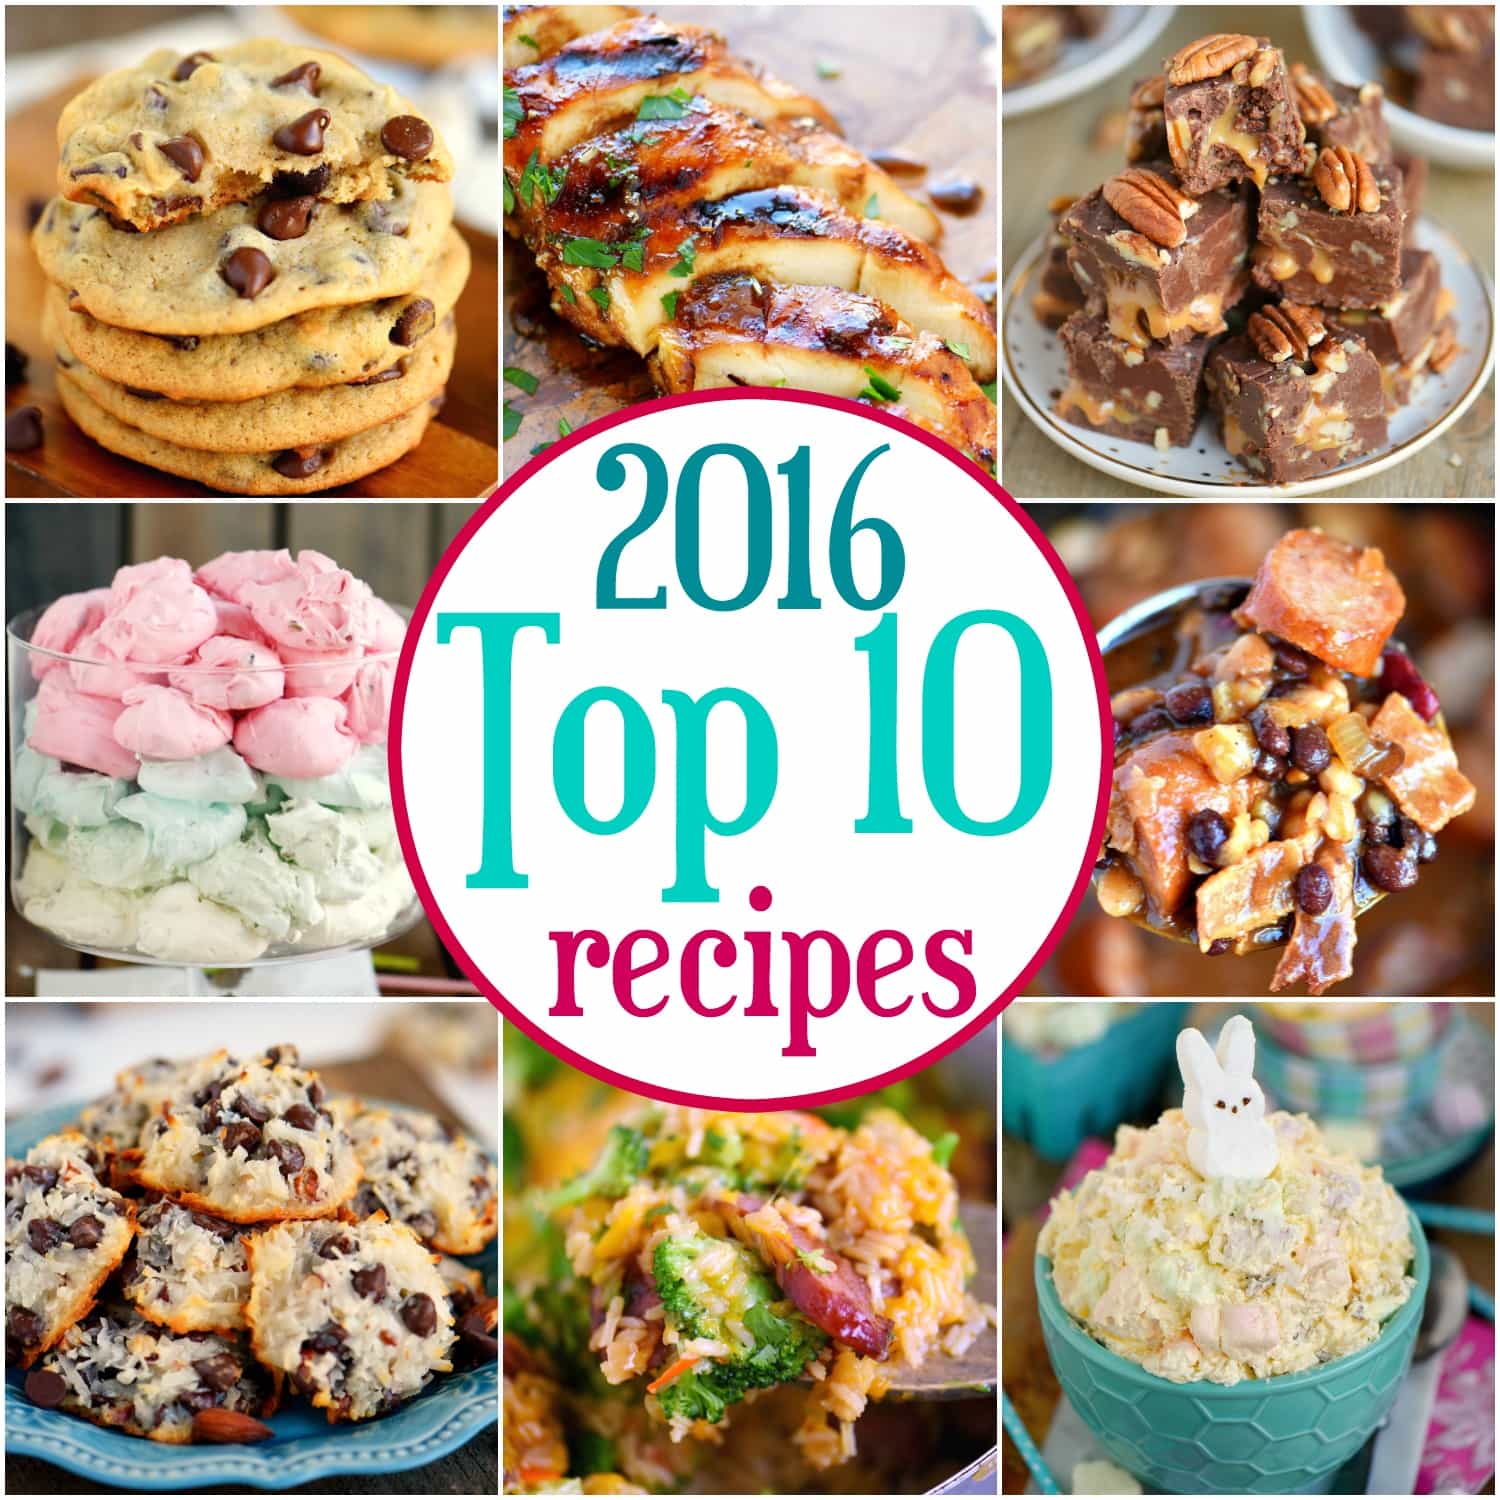 The ten most popular recipes from Mom On Timeout in 2016! A fabulous collection of both sweet and savory! Hope you try them all! // Mom On Timeout